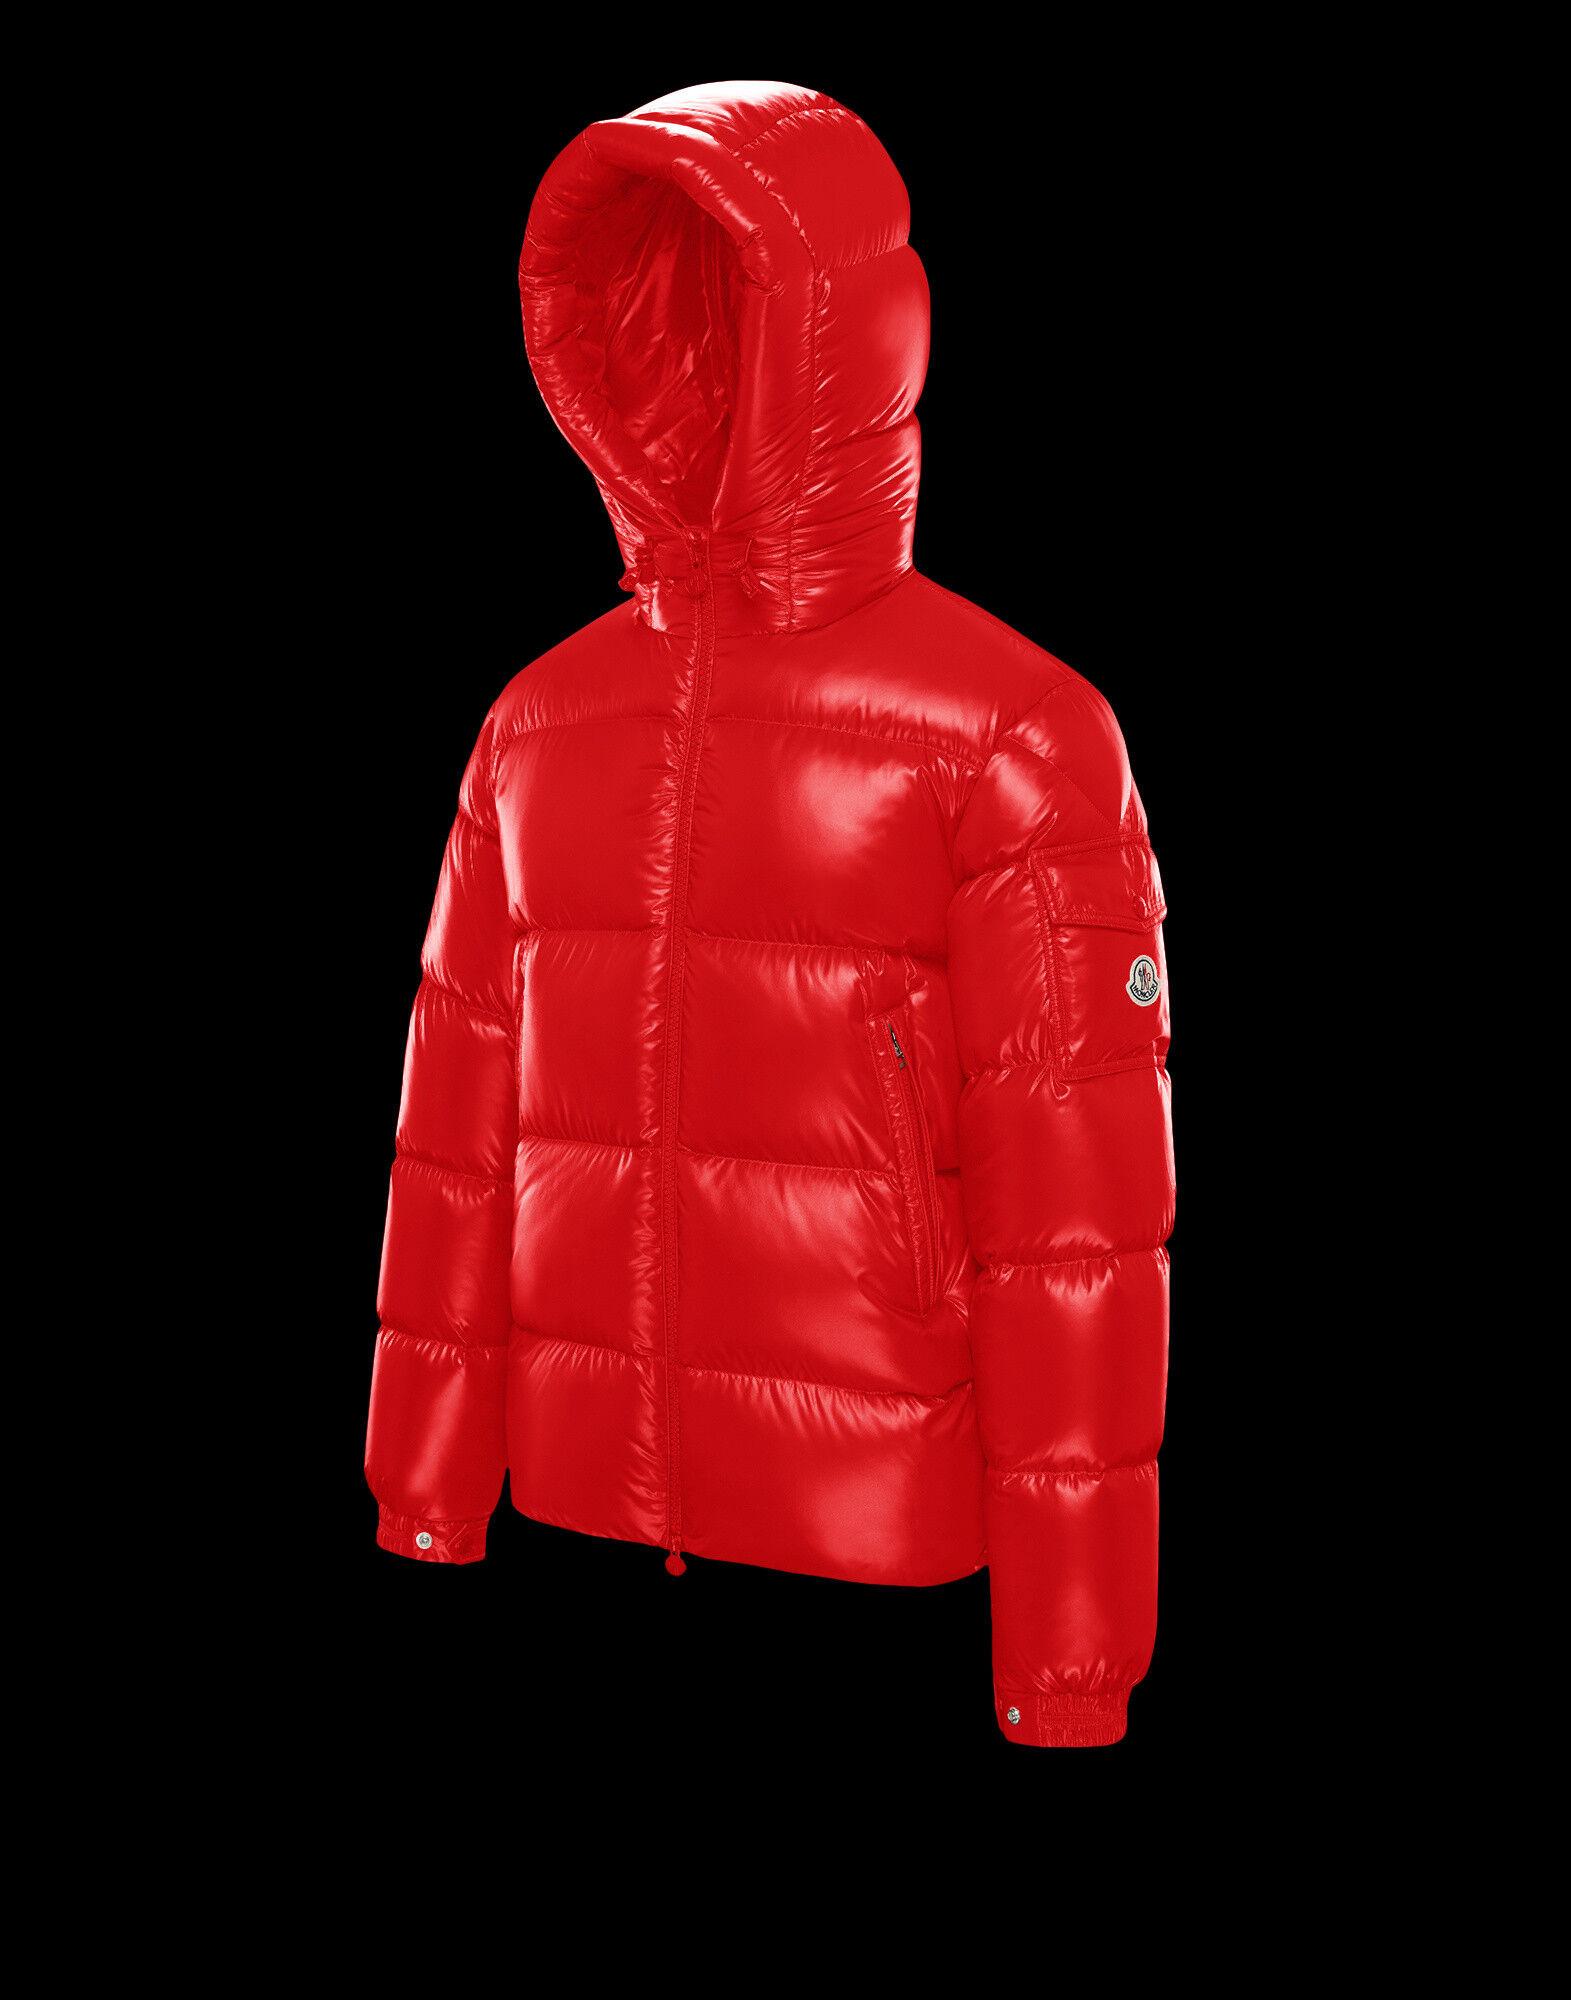 Moncler Synthetic Puffer Down Jacket in Scarlet Red (Red) for Men - Save  62% - Lyst